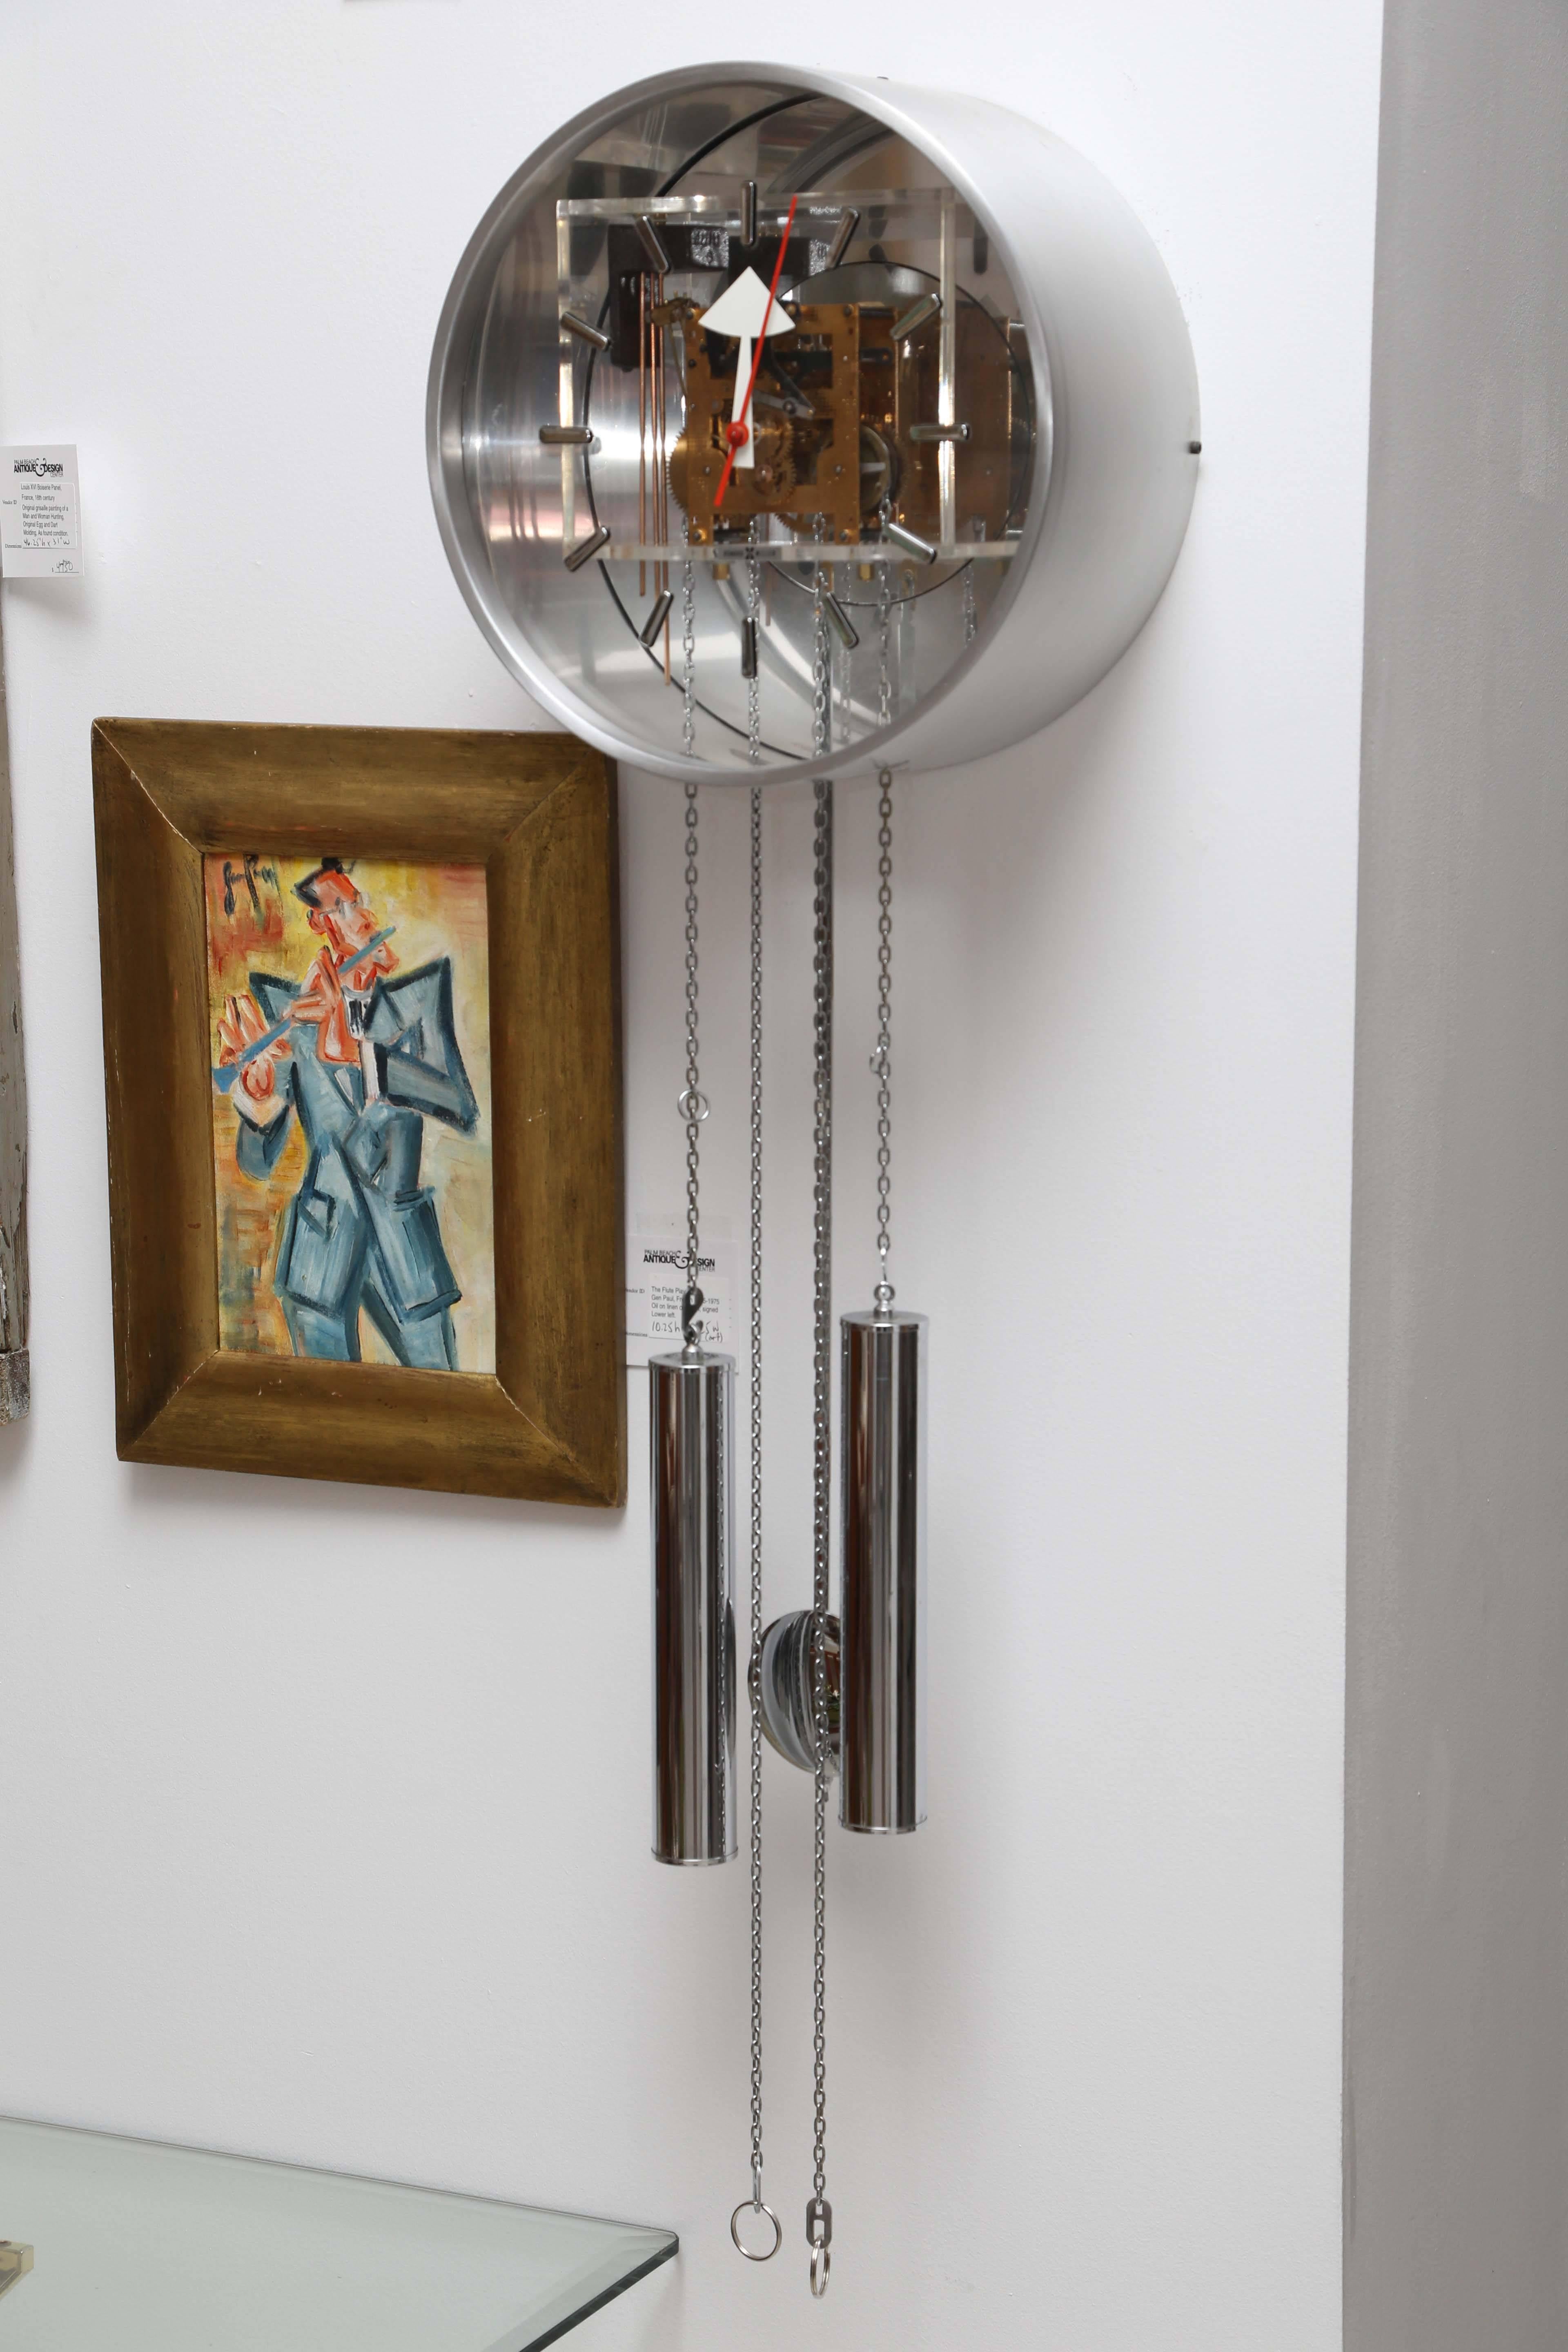 Pendulum wall-mounted clock by George Nelson for Howard Miller made of aluminum, chrome and Lucite. The clock has been professionally serviced in 2016. The face of the clock is 12